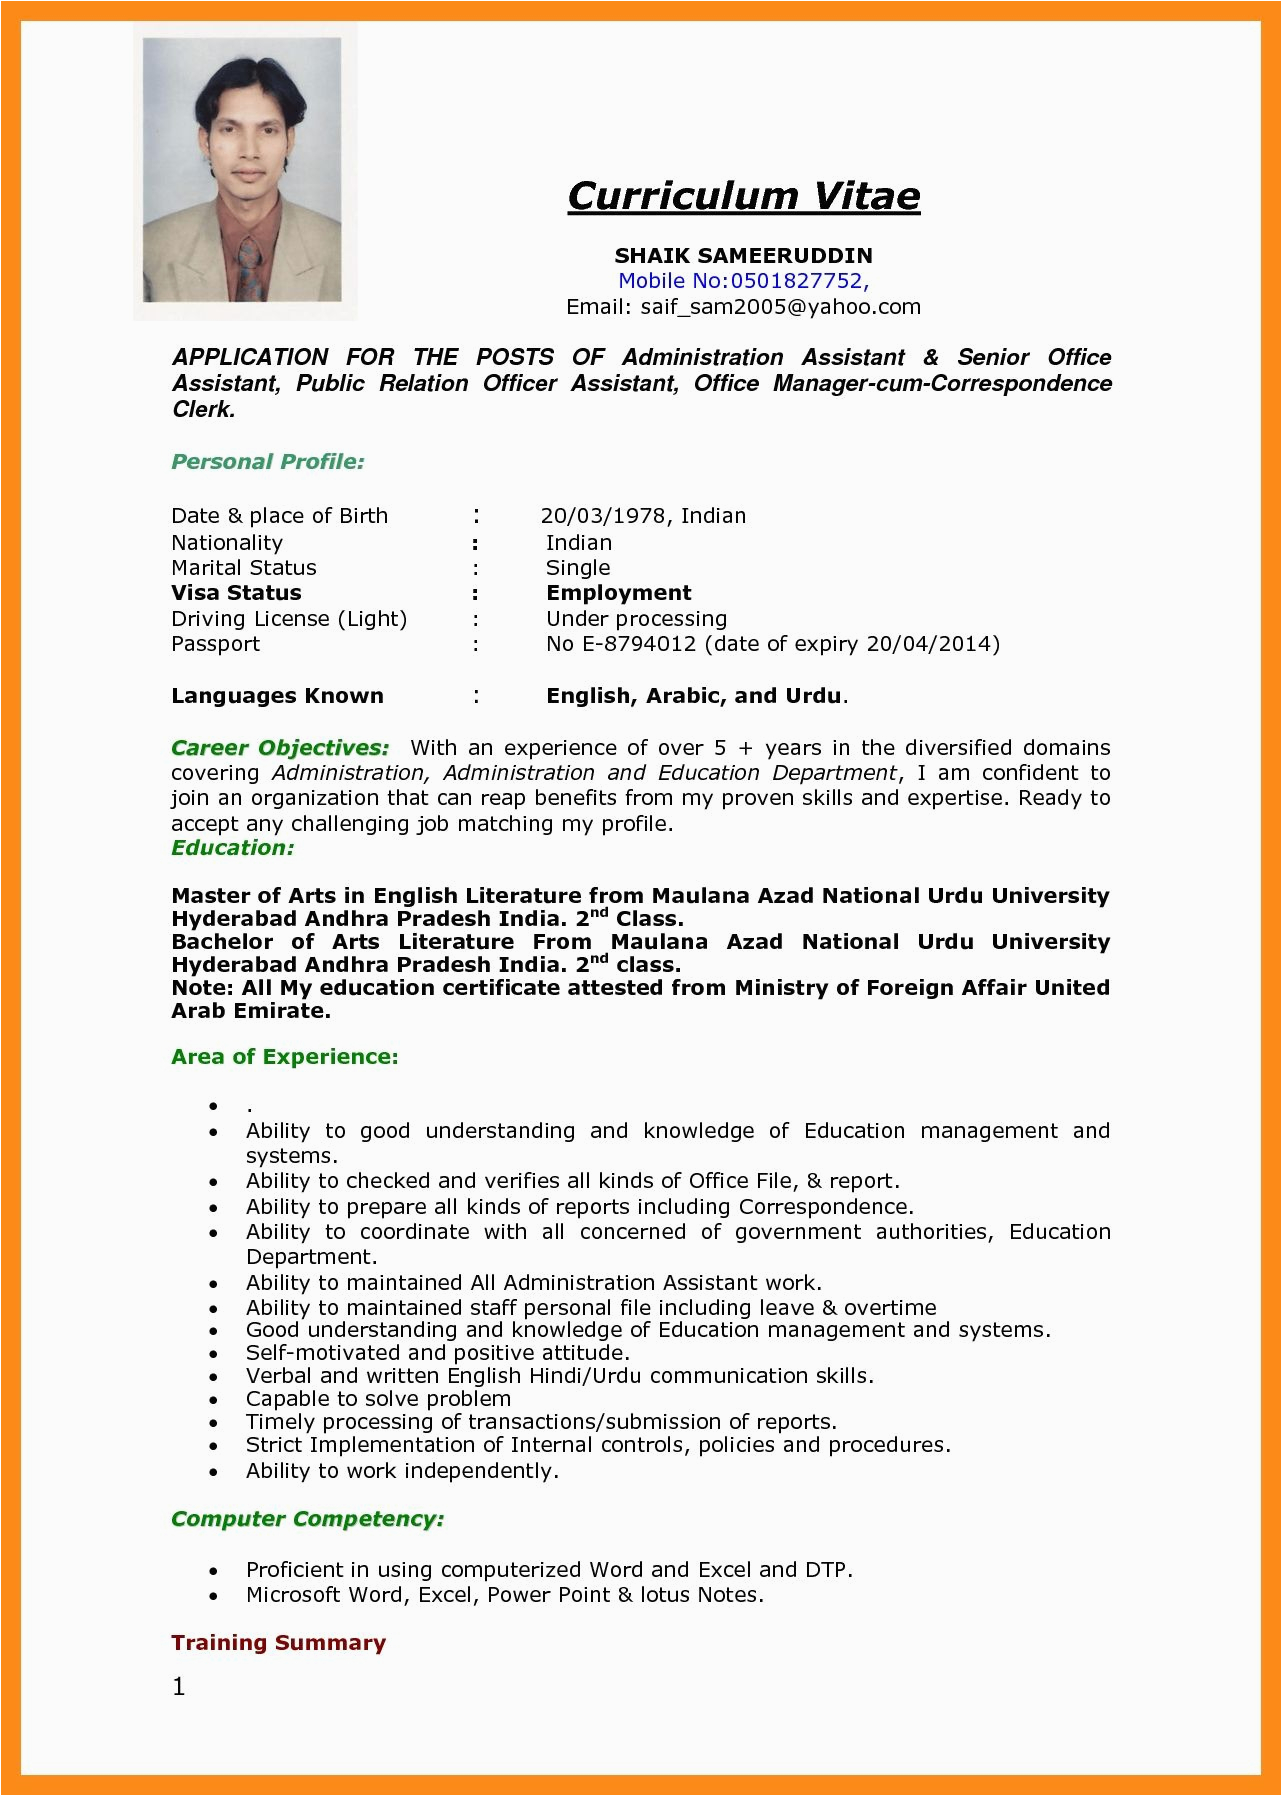 Resume Samples Example Of Resume to Apply Job A Perfect Resume format Resume format